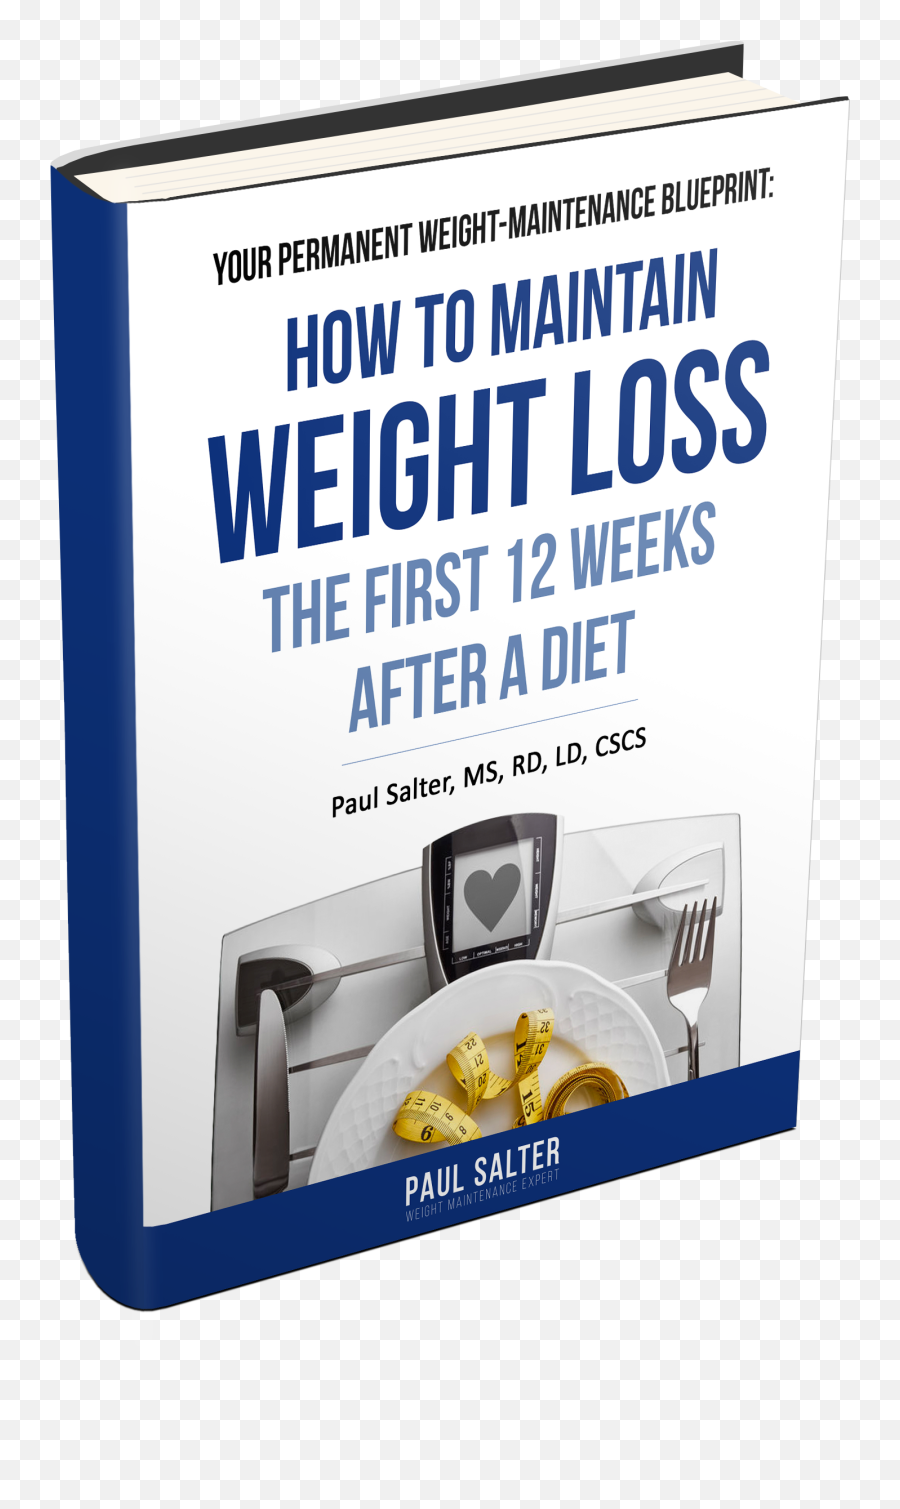 Week Permanent Weight Maintenance Blueprint - Book Cover Emoji,Mental Images Accompanied By Strong Emotion Are Blueprints